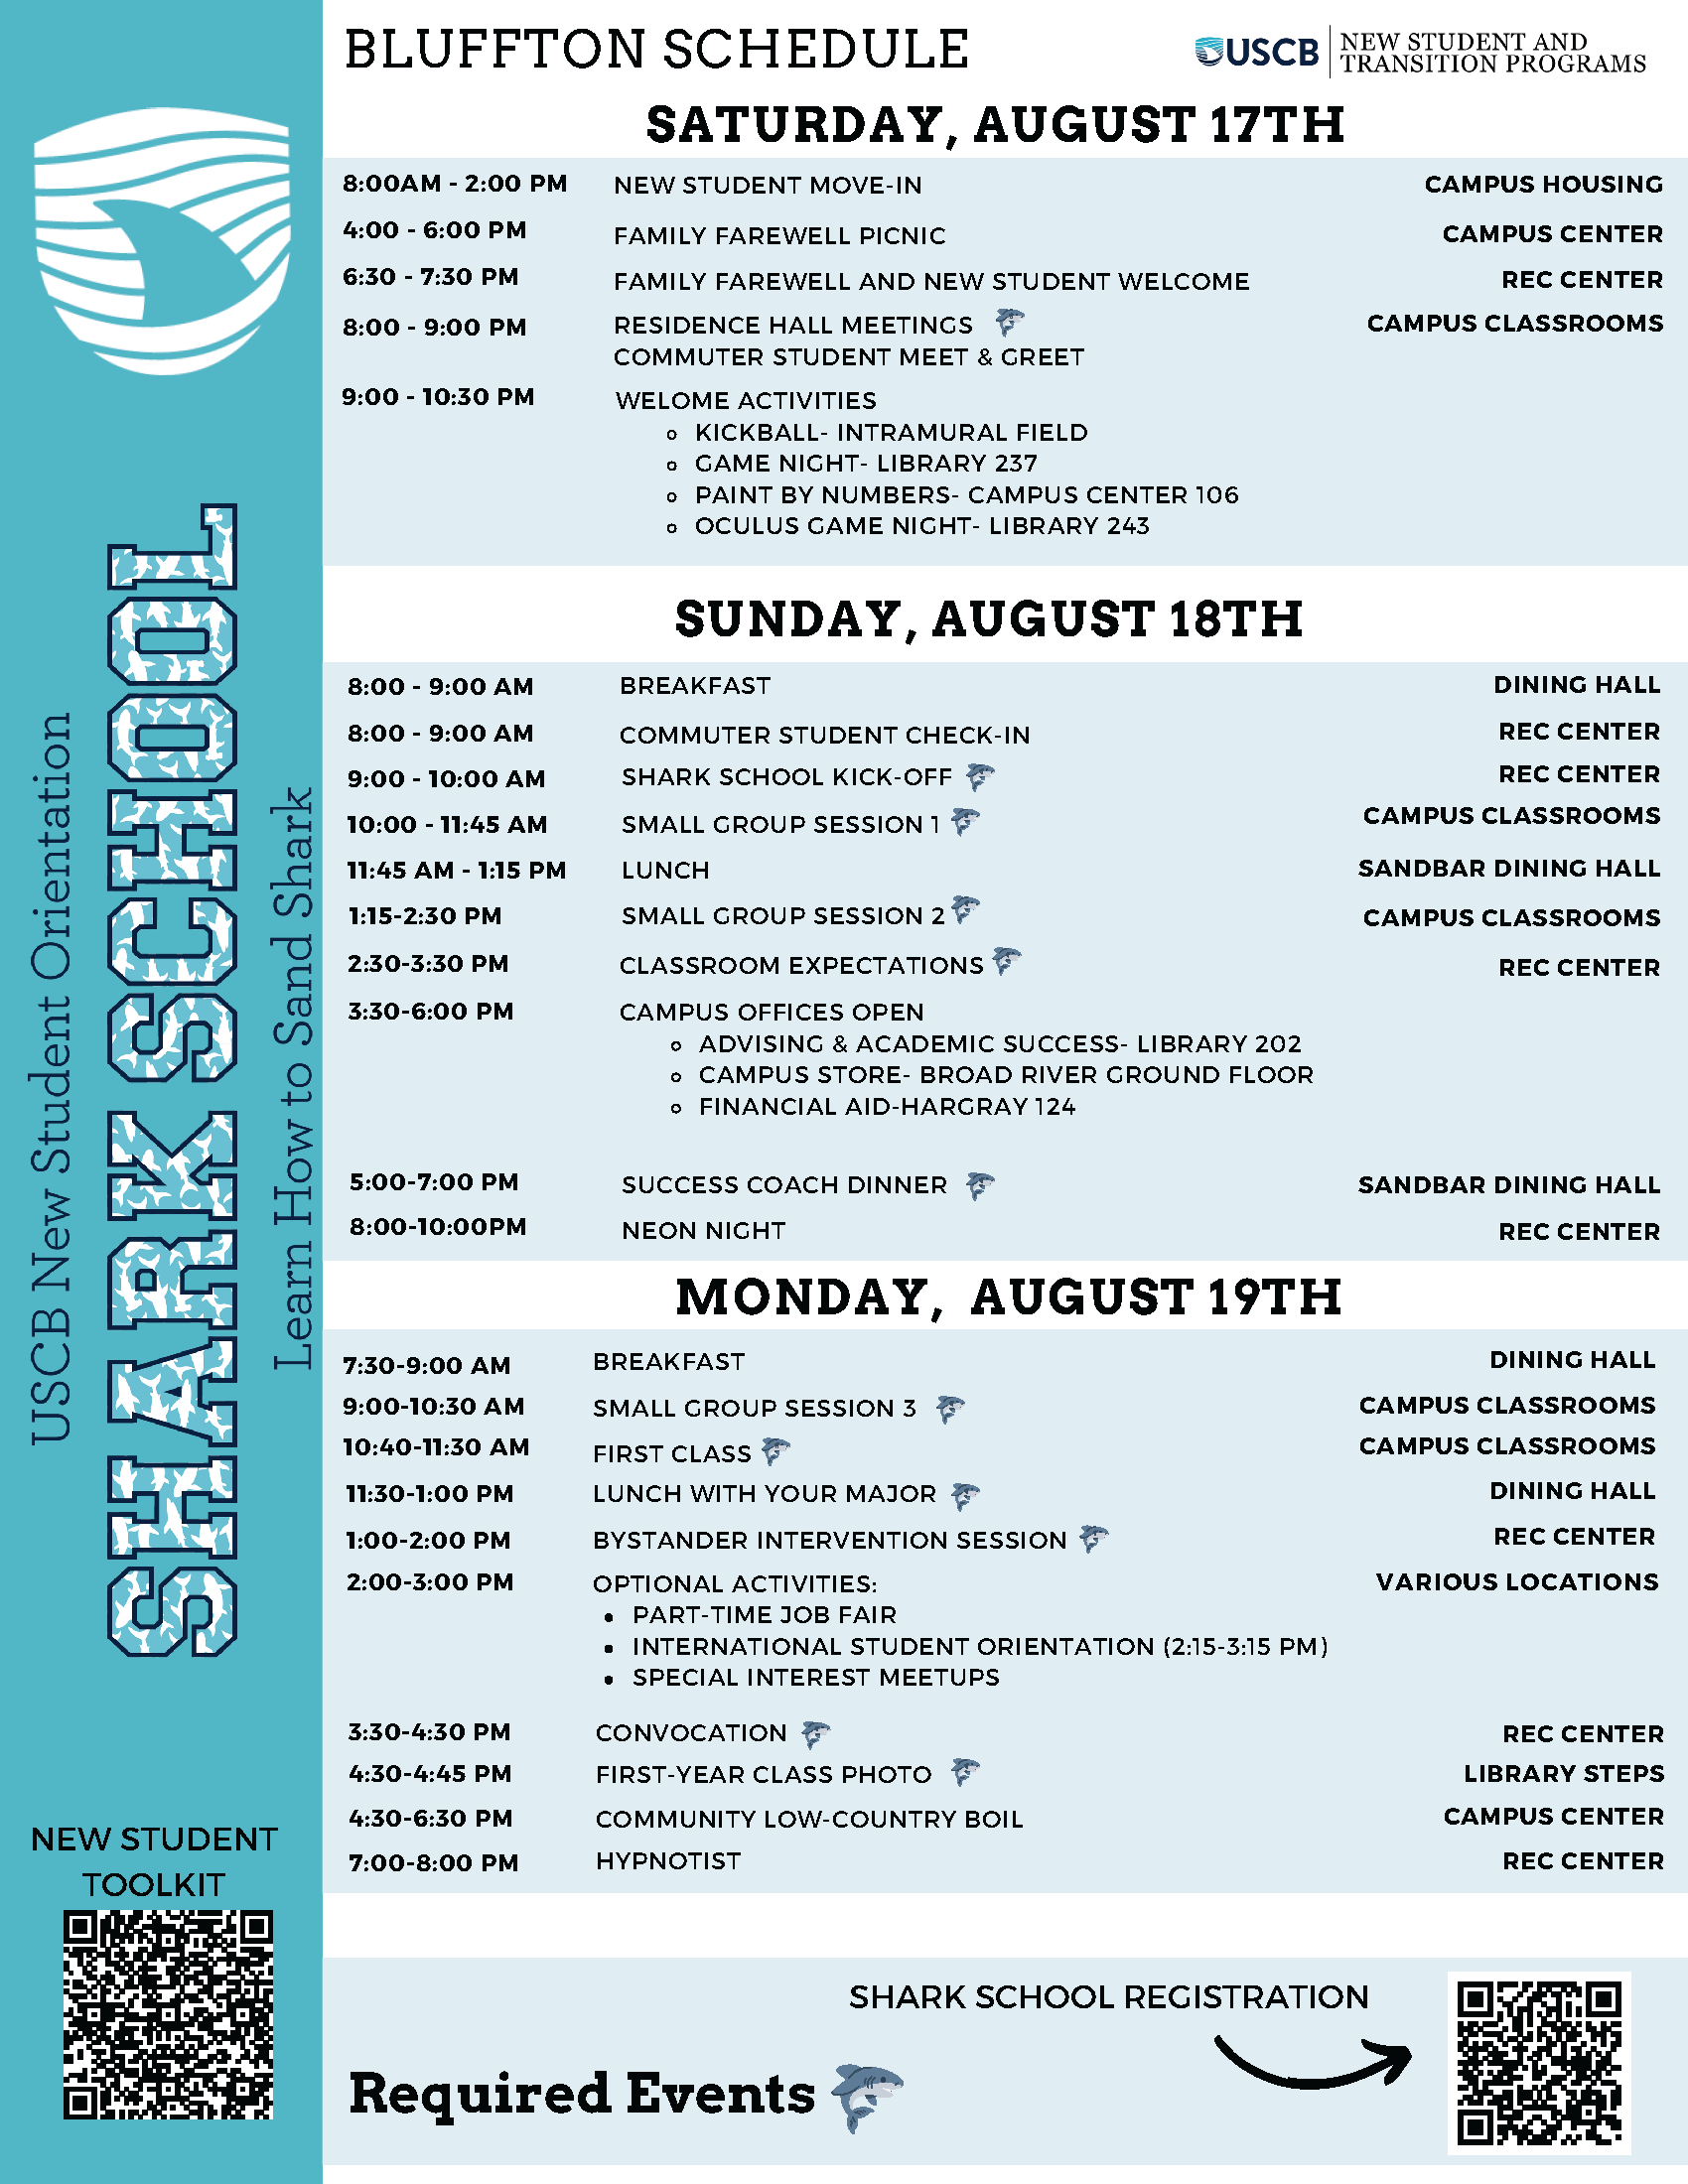 2024 Bluffton Campus Shark School Schedule  *denotes a required event  Saturday, August 17th  8:00 AM-2:00 PM New Student Move-in- Campus Housing  4:00-6:00 PM Family Farewell Picnic- Campus Center  6:30-7:30 PM Family Farewell and New Student Welcome- Rec Center  8:00-9:00 PM Residence Hall Meeting- Campus Classrooms*  Commuter Student Meet & Greet  9:00-10:30 PM Welcome Activities  · Kickball- Intramural Field  · Game Night- Library 237  · Paint by Numbers- Campus Center 106  · Oculus Game Night- Library 243  Sunday, August 18th  7:30-9:00 AM Breakfast- Dining Hall  8:00-9:00 AM Commuter Student Check-in- Rec Center  9:00-10:00 AM Shark School Kick-off- Rec Center*  10:00-11:45 AM Shark School Small Group Session 1-Campus Classrooms*  11:45 AM-1:15 PM Lunch- Sand Bar Dining Hall  1:15-2:30 PM Shark School Small Group Session 2- Campus Classrooms*  2:30-3:30 PM Classroom Expectations- Rec Center*  3:30-6:00 PM Campus Offices Open:  · Advising & Academic Success- Library 202  · Bursar- Hargray 136  · Campus Store- Broad River Ground Floor  · Financial Aid-Hargray 124  5:00-7:00 PM Success Coach Dinner- Sand Bar Dining Hall*  8:00-10:00 PM Neon Night- Rec Center  Monday, August 19th  7:30-9:30 AM Breakfast- Dining Hall  9:30-10:30 AM Small Group Session 3- Campus Classrooms*  10:40 AM-11:30 PM First Class- Campus Classrooms*  11:30-1:00 PM Lunch with Your Major- Sand Bar Dining Hall*  1:00-2:00 PM Bystander Intervention Session- Rec Center*  2:00-3:00 PM Optional Activities- Various Locations  · Part-time Job Fair  · Drunk Driving obstacle course  · Special Interest Meetups  3:30-4:30 PM Convocation- Rec Center*  4:30-6:30 PM Community Low-Country Boil- Campus Center  7:00-8:00 PM- Hypnotist- Rec Center